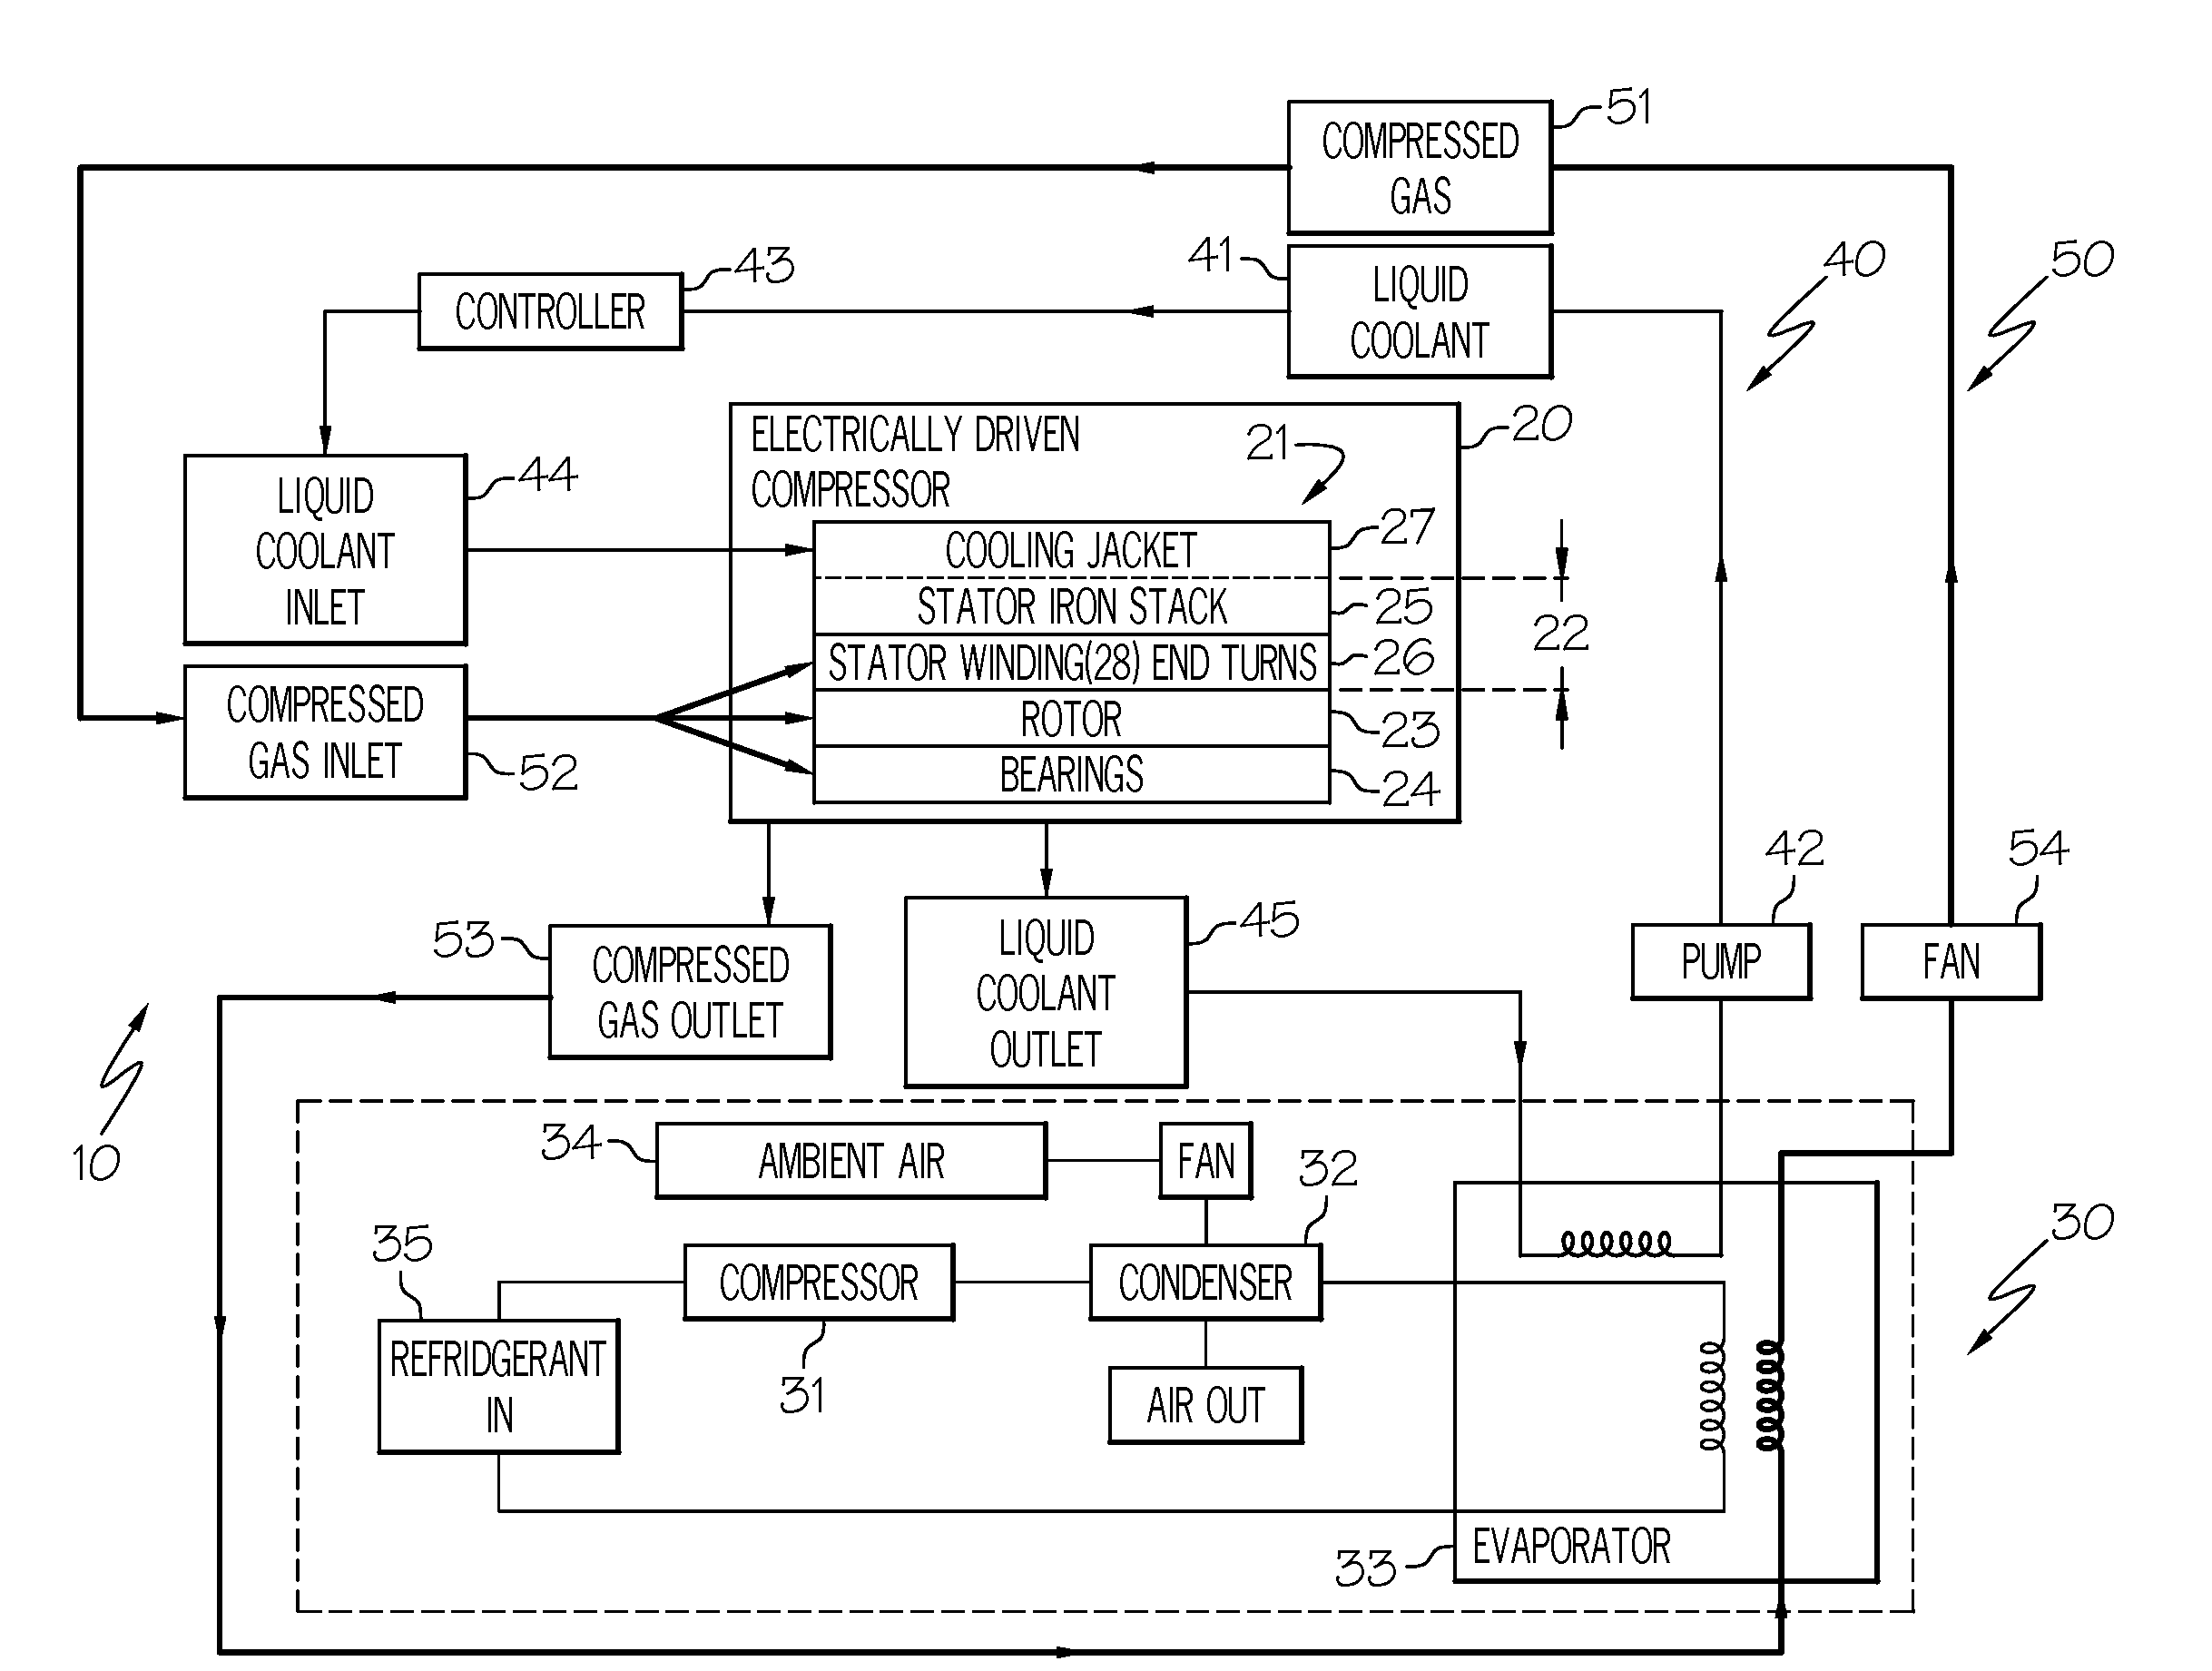 Thermal and secondary flow management of electrically driven compressors